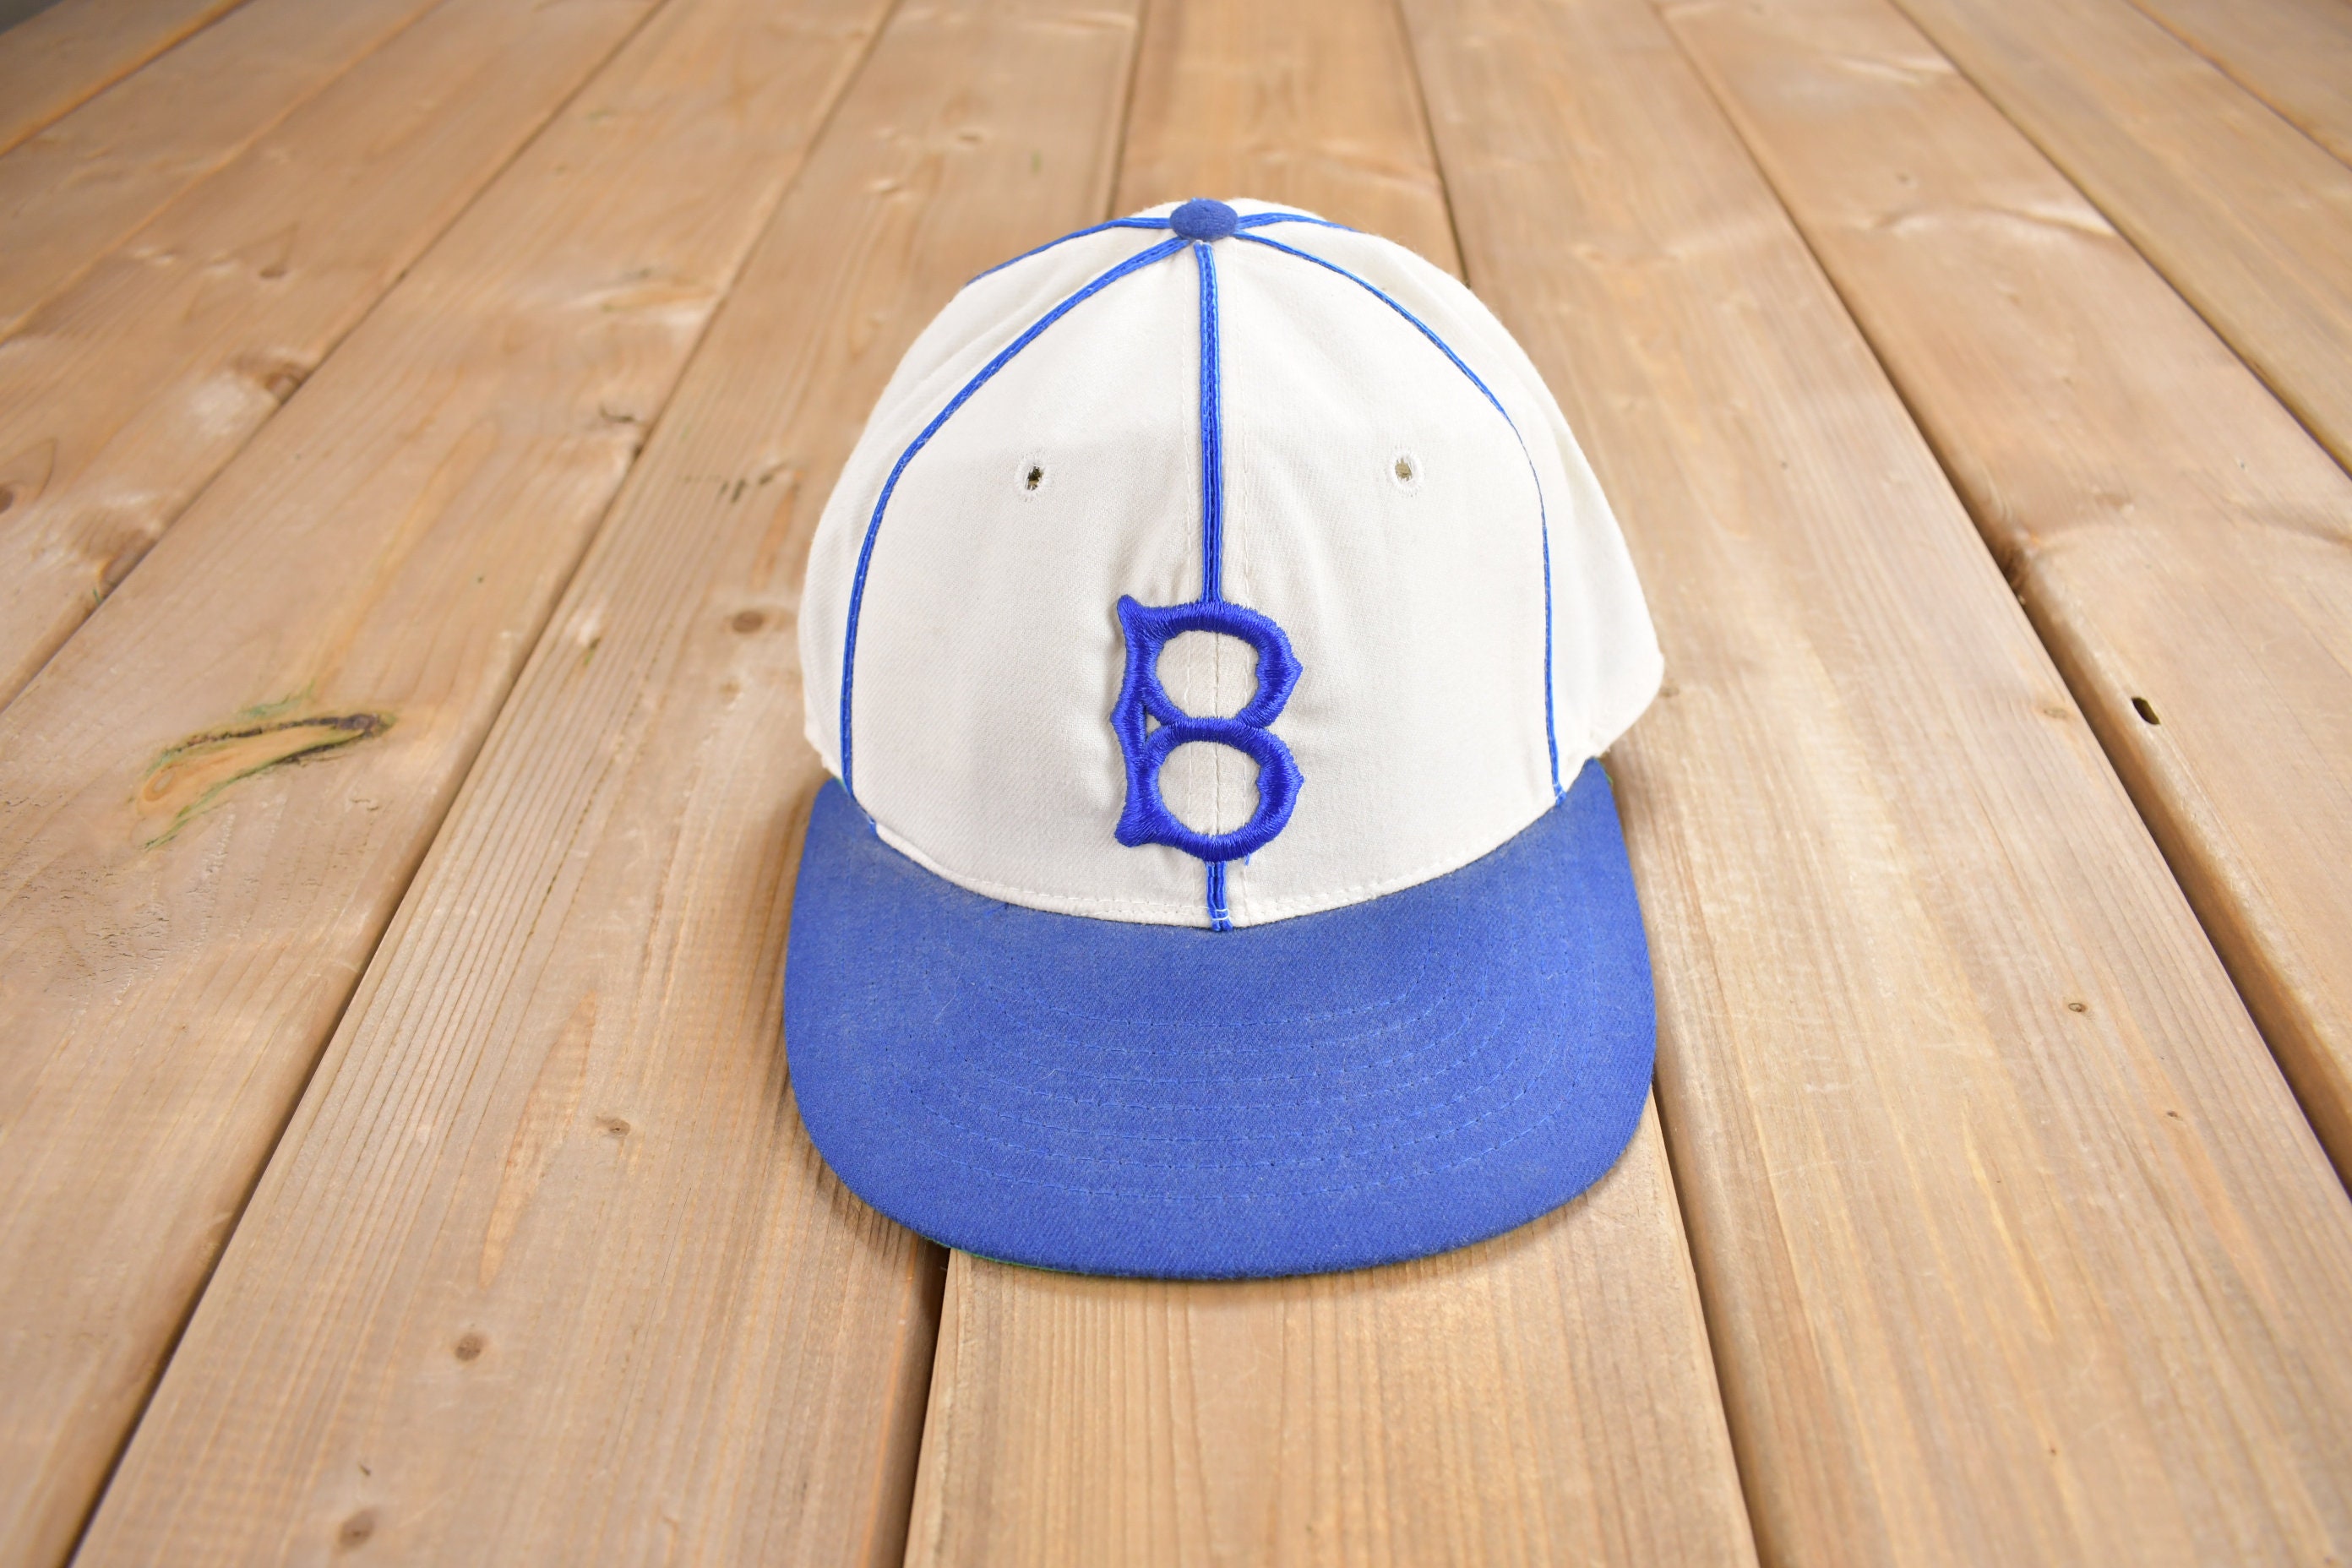 Vintage 1970s Brooklyn Dodgers MLB L Fitted Hat Size 7 / -  Denmark